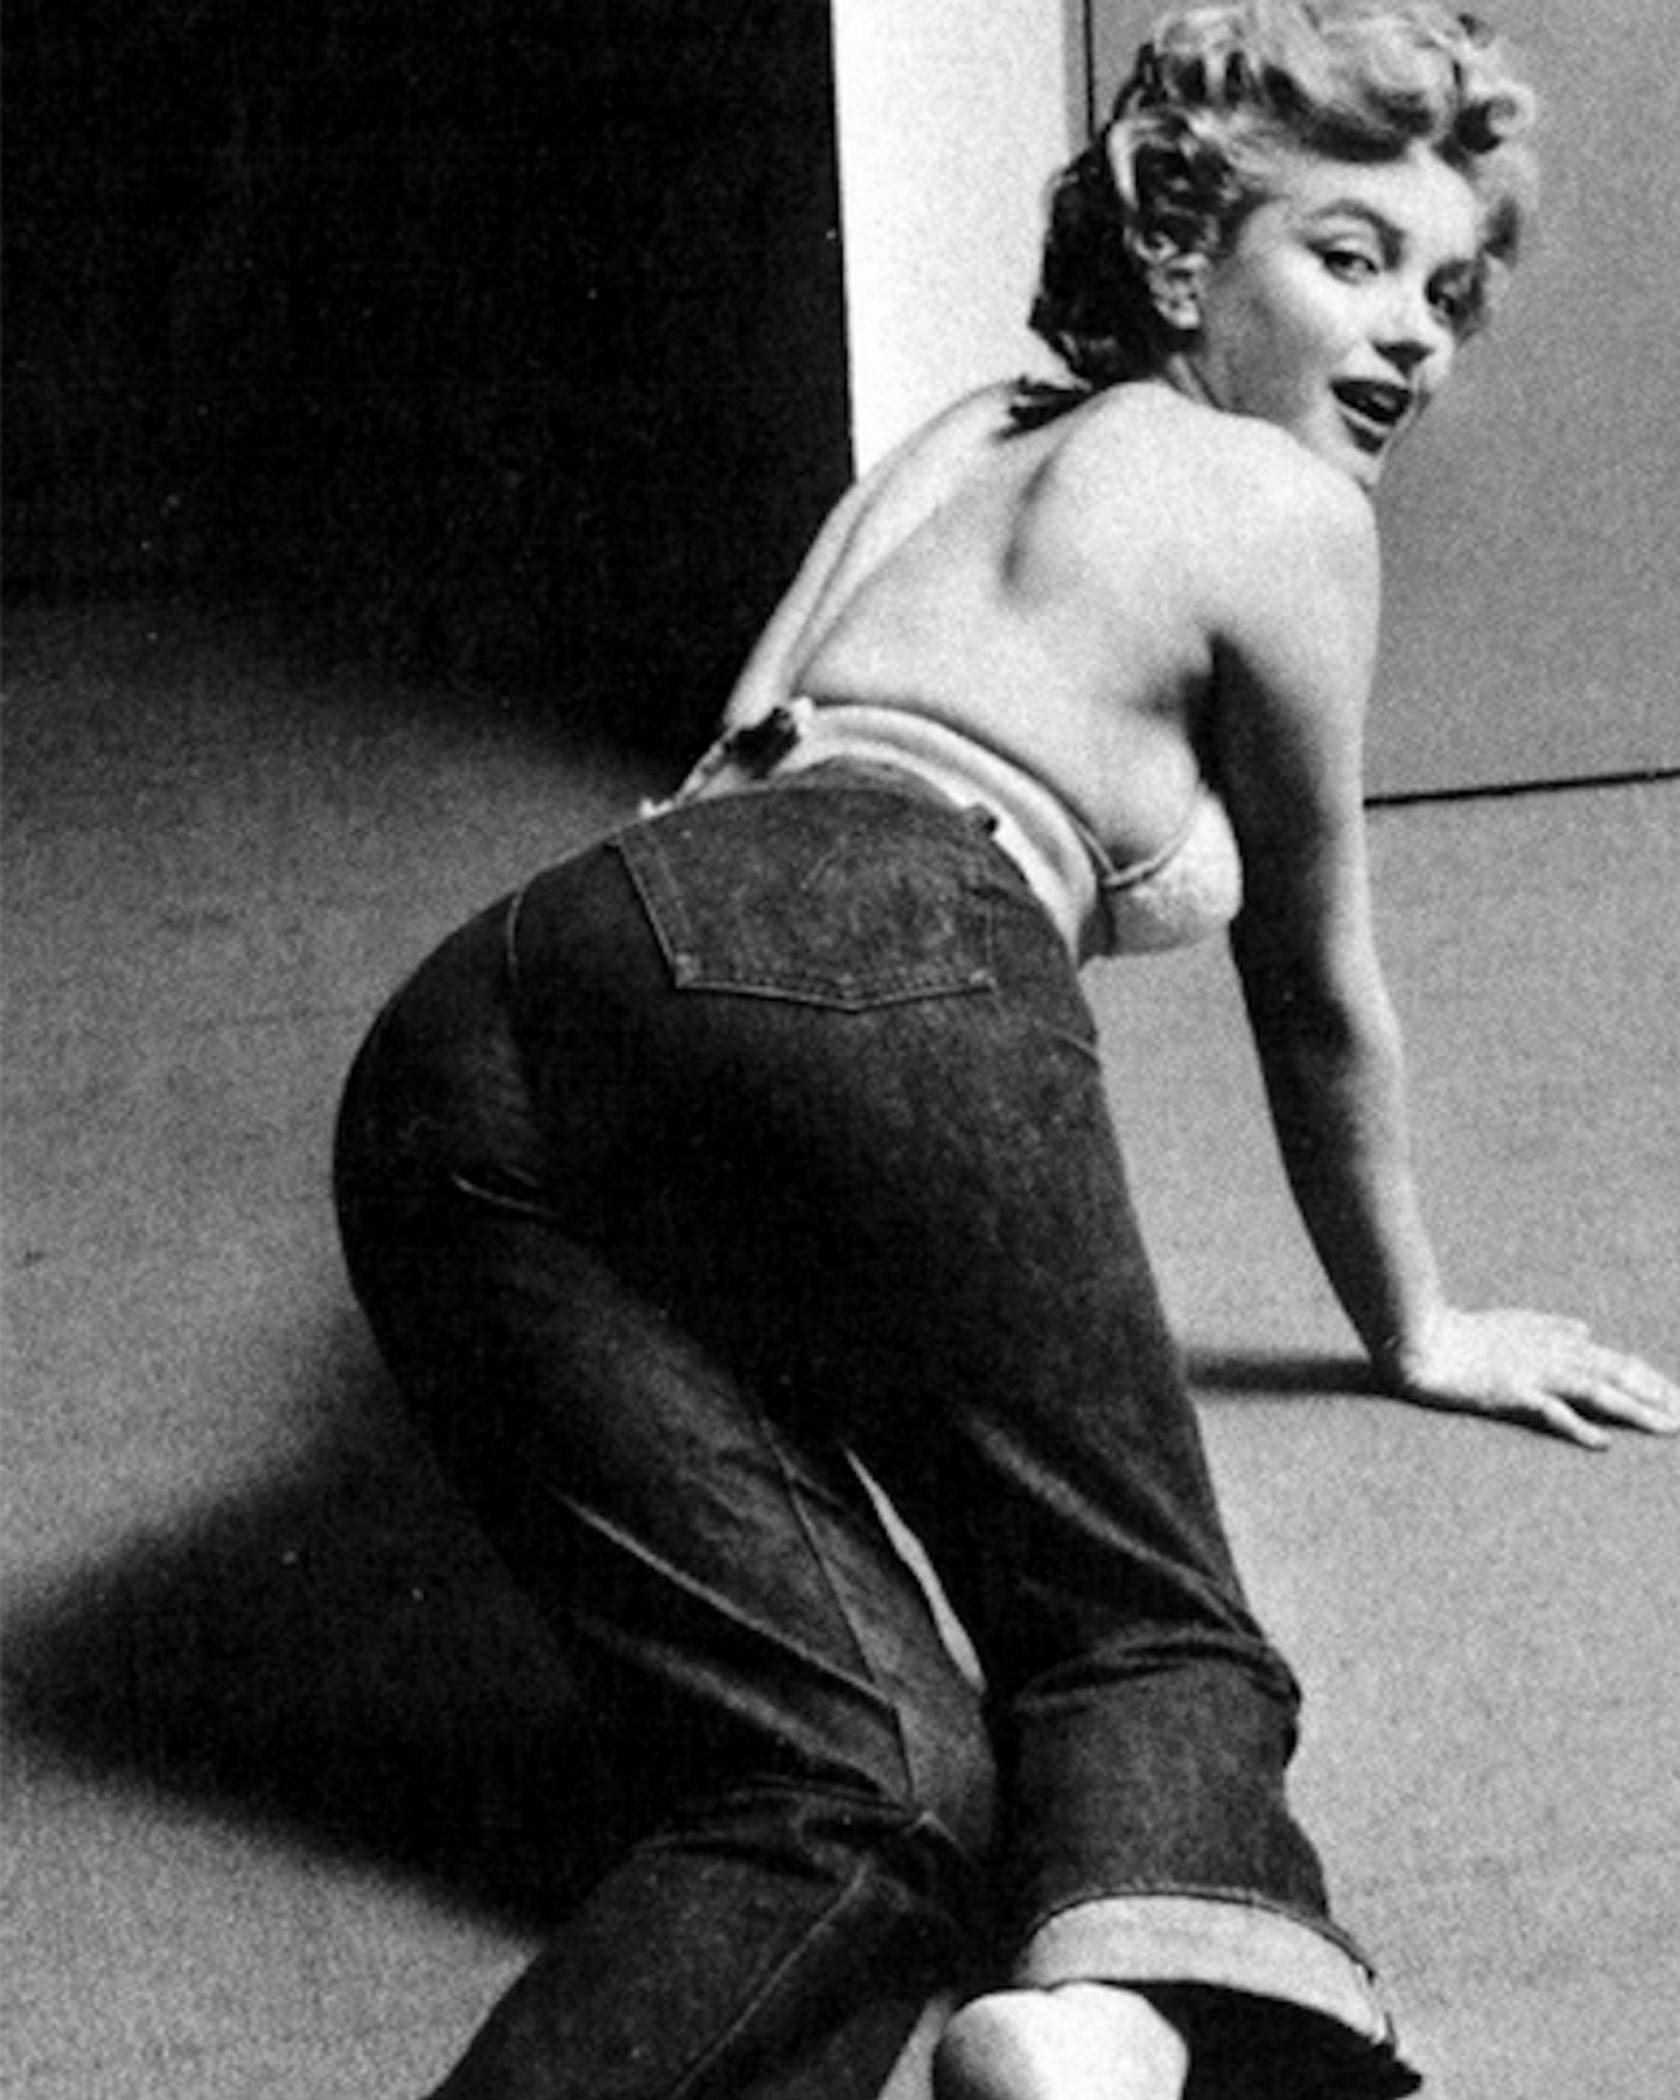 A black and white photo of Marlin Monroe crawling on the floor wearing 501 jeans.